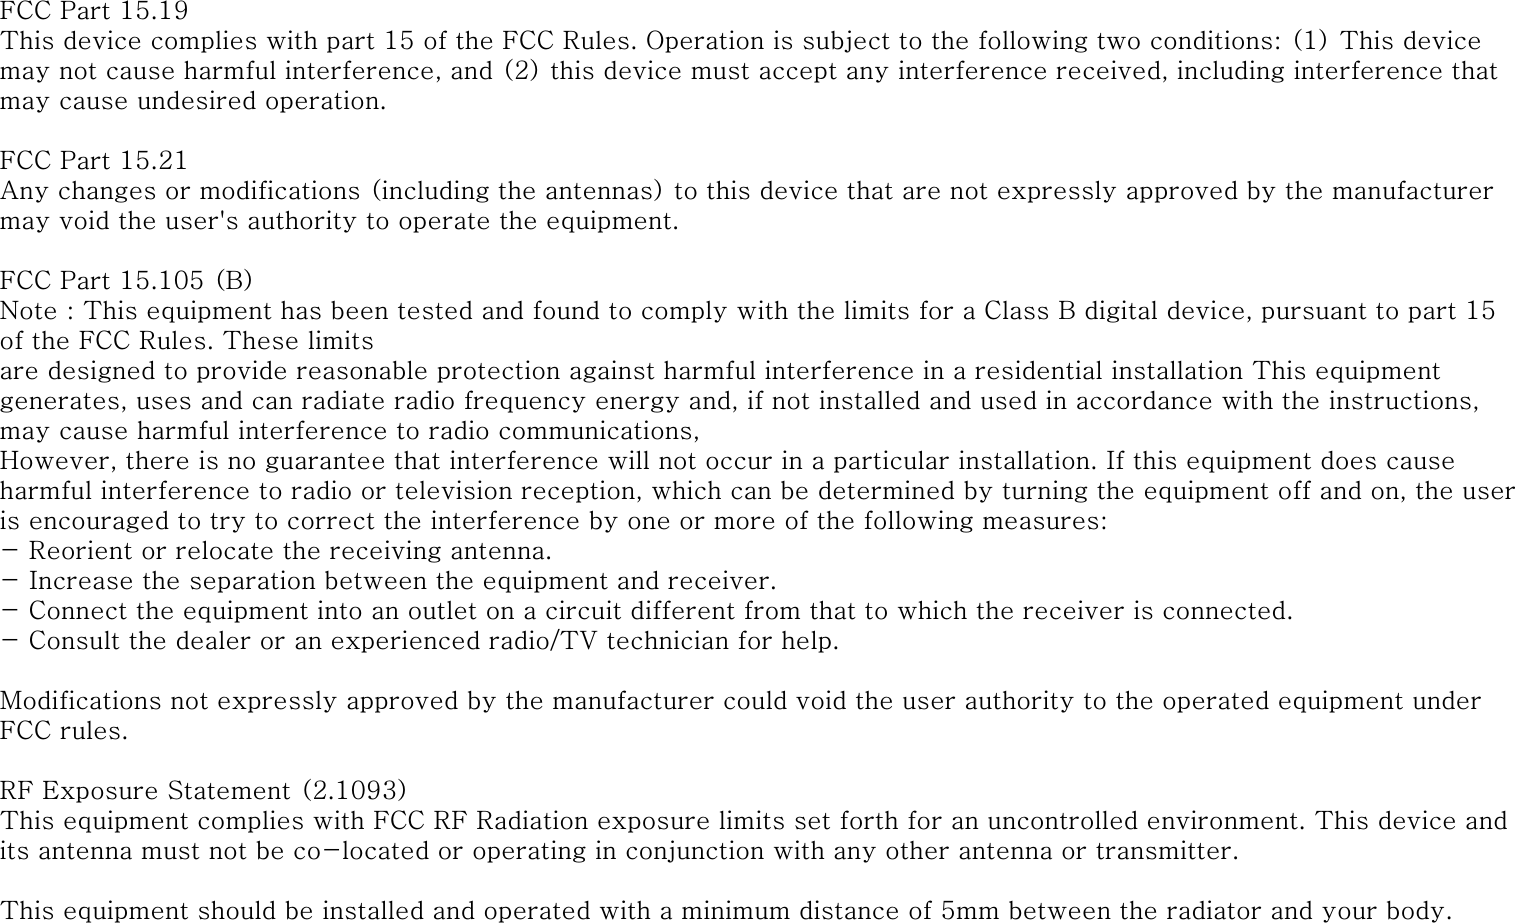 FCC Part 15.19This device complies with part 15 of the FCC Rules. Operation is subject to the following two conditions: (1) This device may not cause harmful interference, and (2) this device must accept any interference received, including interference that may cause undesired operation.FCC Part 15.21Any changes or modifications (including the antennas) to this device that are not expressly approved by the manufacturer may void the user&apos;s authority to operate the equipment.FCC Part 15.105 (B)Note : This equipment has been tested and found to comply with the limits for a Class B digital device, pursuant to part 15 of the FCC Rules. These limitsare designed to provide reasonable protection against harmful interference in a residential installation This equipment generates, uses and can radiate radio frequency energy and, if not installed and used in accordance with the instructions, may cause harmful interference to radio communications,However, there is no guarantee that interference will not occur in a particular installation. If this equipment does cause harmful interference to radio or television reception, which can be determined by turning the equipment off and on, the user is encouraged to try to correct the interference by one or more of the following measures:- Reorient or relocate the receiving antenna.- Increase the separation between the equipment and receiver.- Connect the equipment into an outlet on a circuit different from that to which the receiver is connected. - Consult the dealer or an experienced radio/TV technician for help.Modifications not expressly approved by the manufacturer could void the user authority to the operated equipment under FCC rules.RF Exposure Statement (2.1093)This equipment complies with FCC RF Radiation exposure limits set forth for an uncontrolled environment. This device and its antenna must not be co-located or operating in conjunction with any other antenna or transmitter.This equipment should be installed and operated with a minimum distance of 5mm between the radiator and your body.